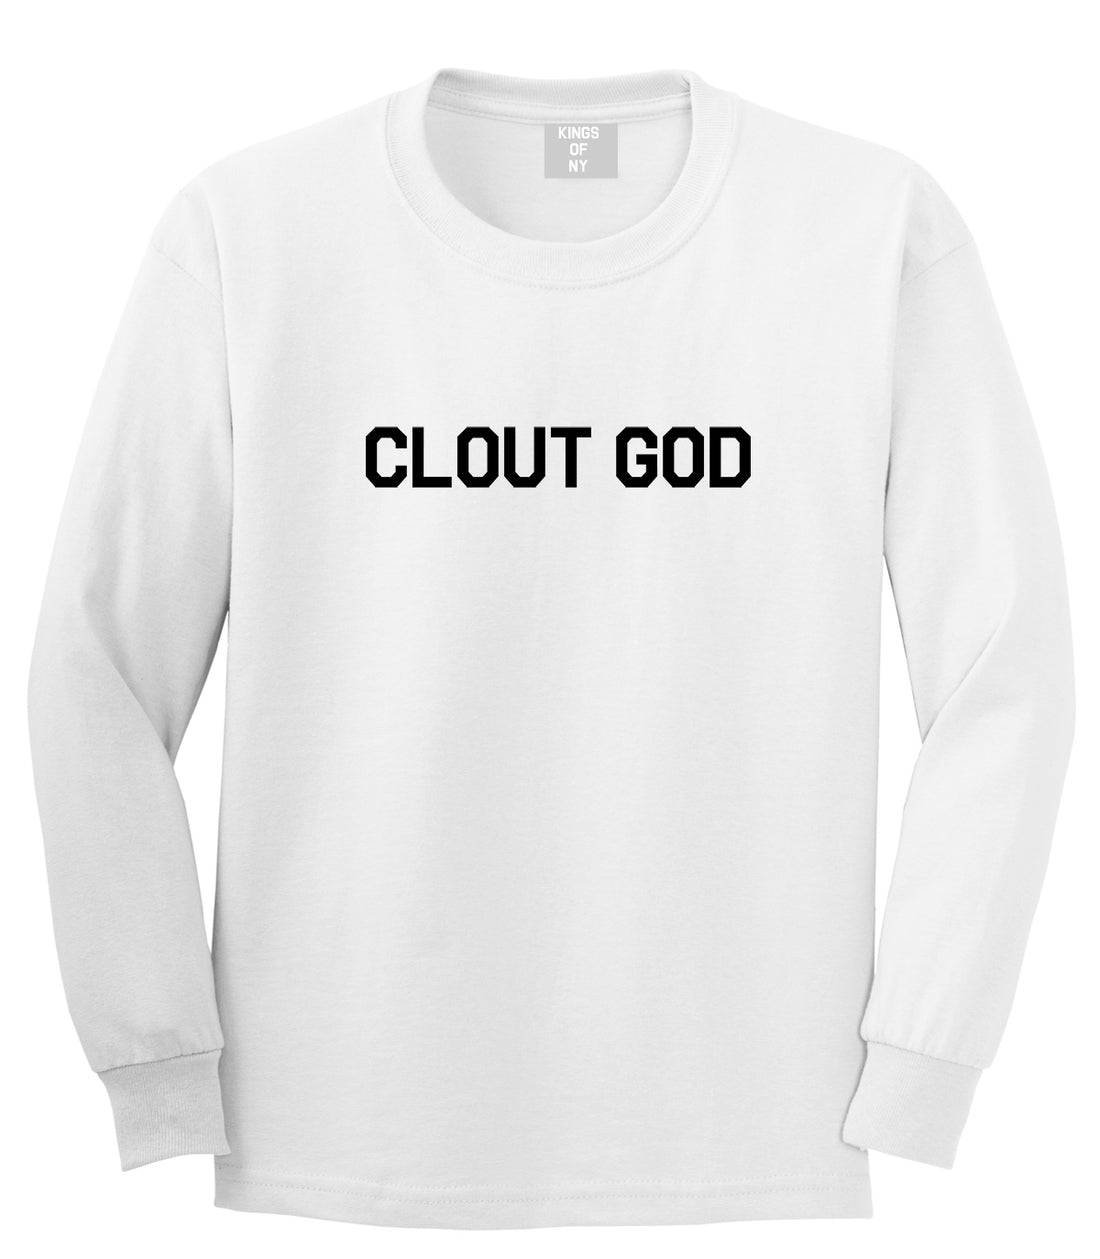 Clout God Mens Long Sleeve T-Shirt White by Kings Of NY